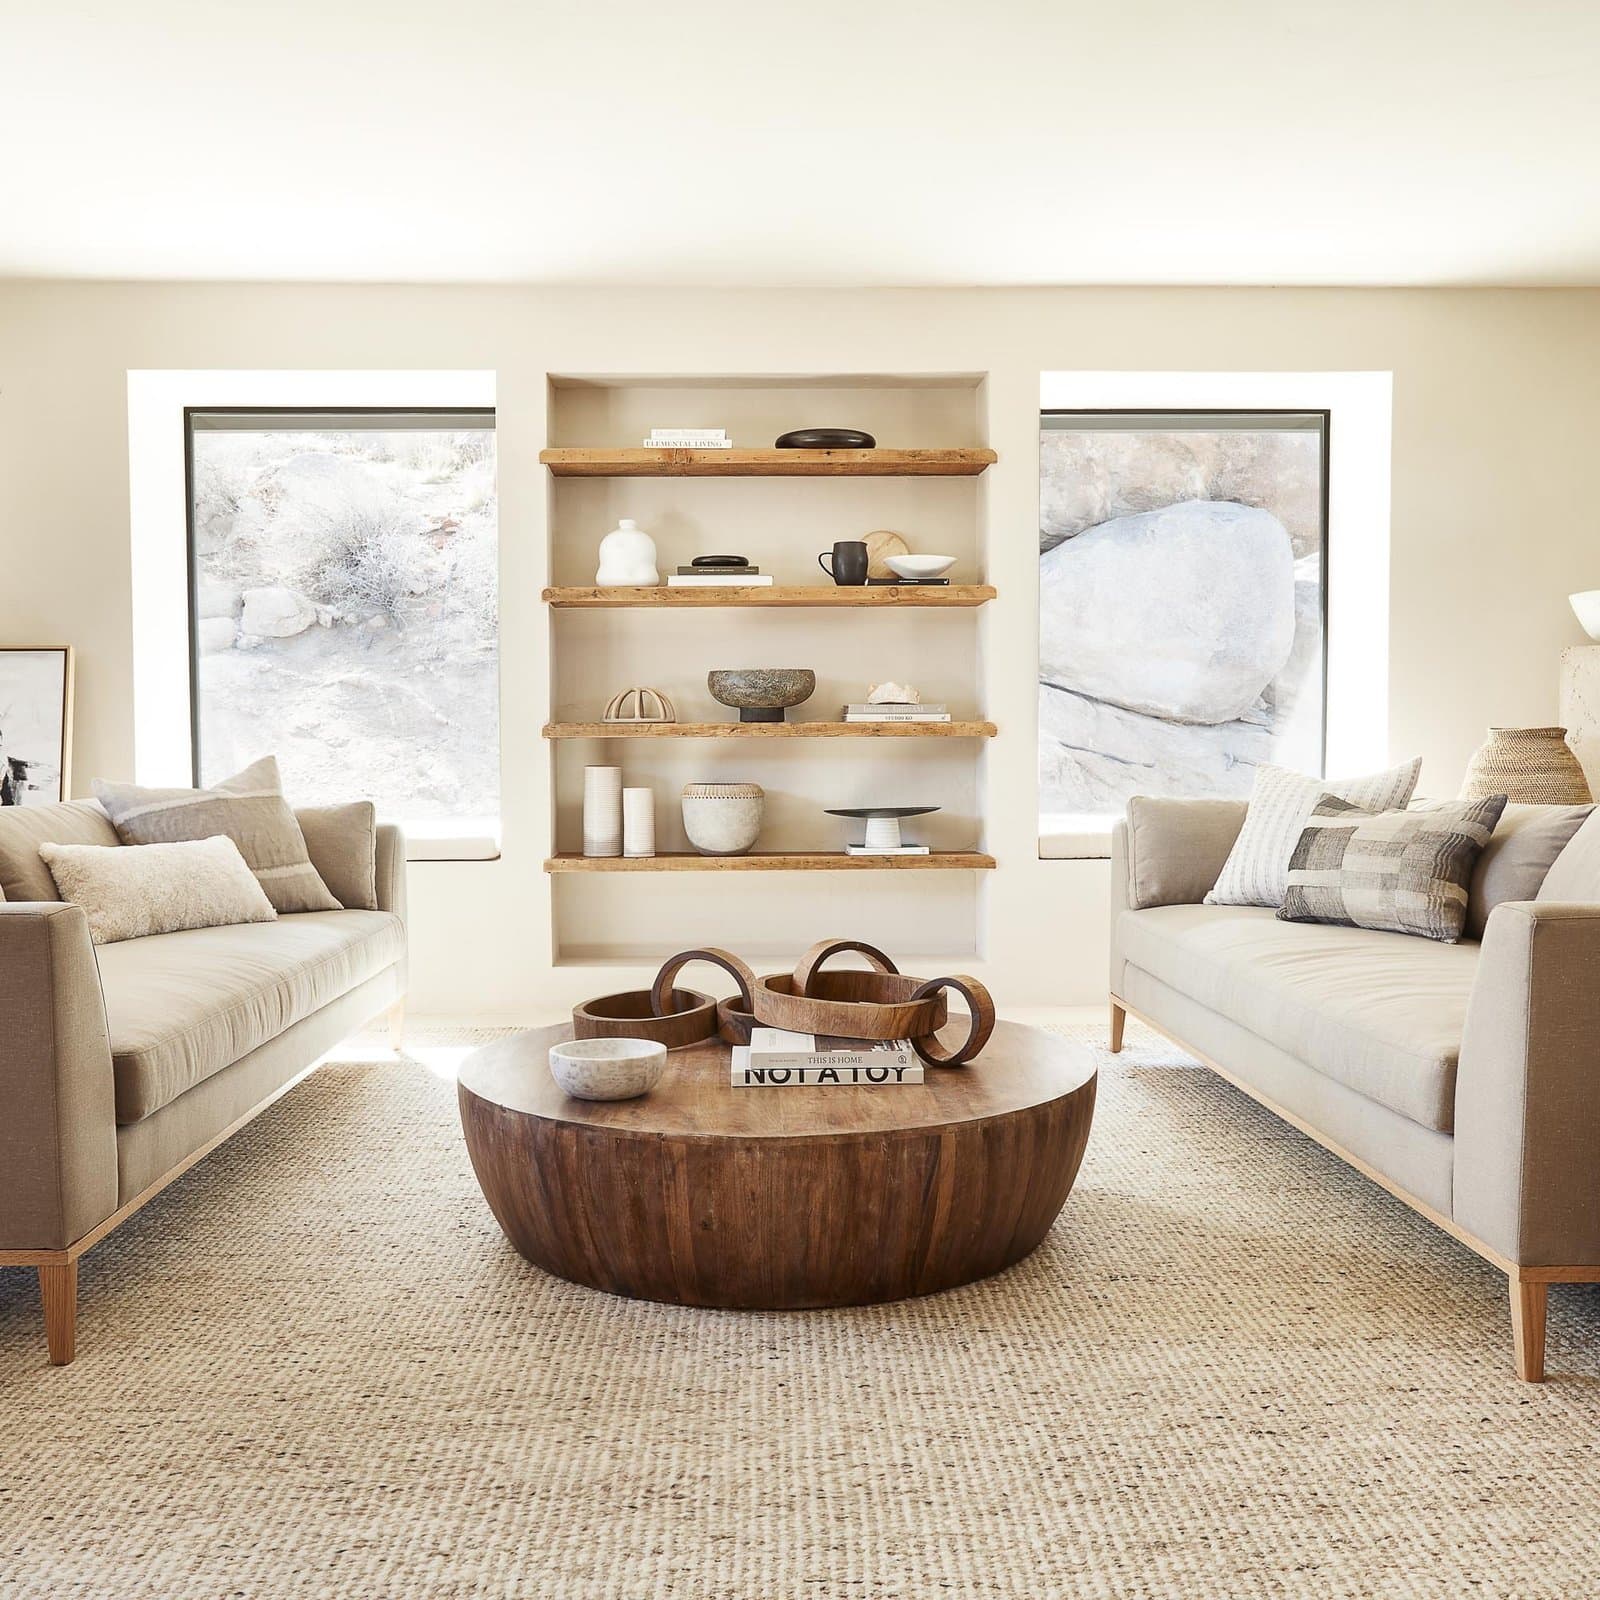 Pull in Earthy Vibes with a Wooden Coffee Table